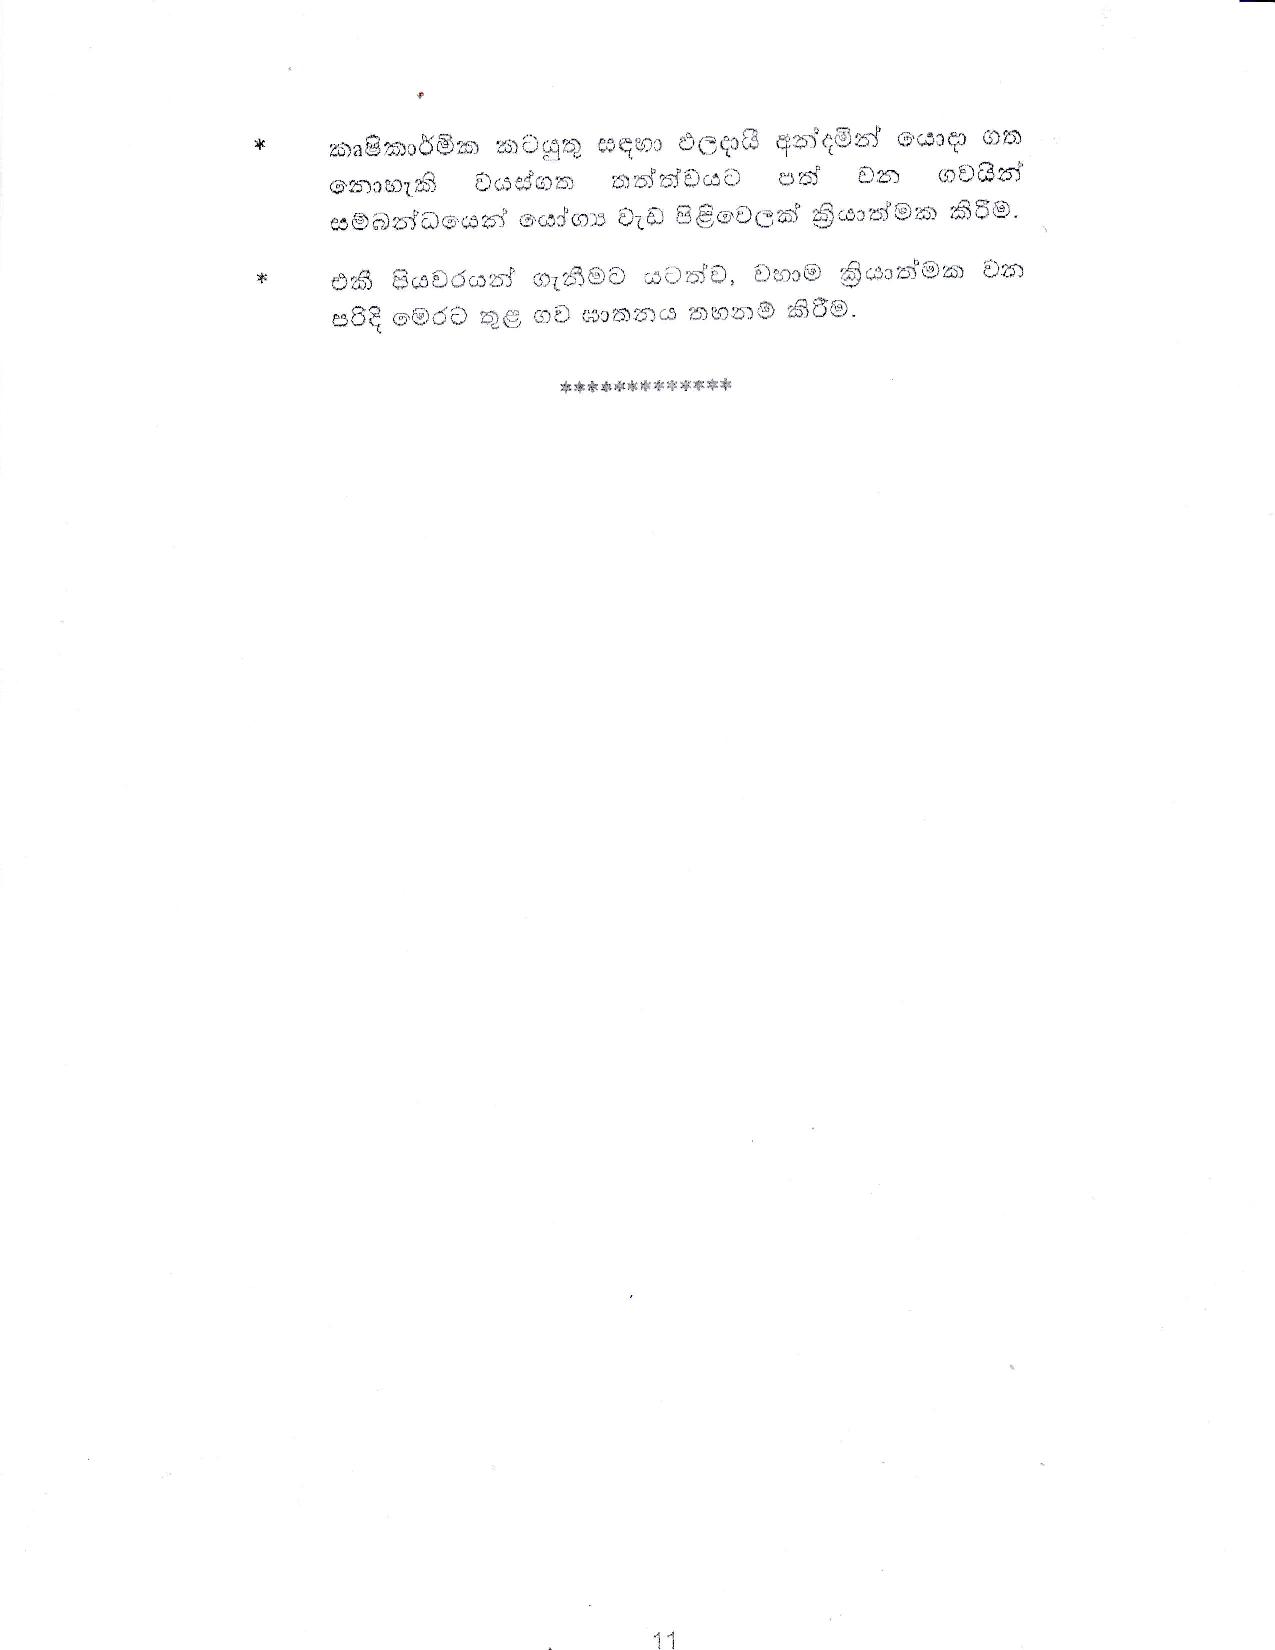 Cabinet Decision on 28.09.2020 page 011